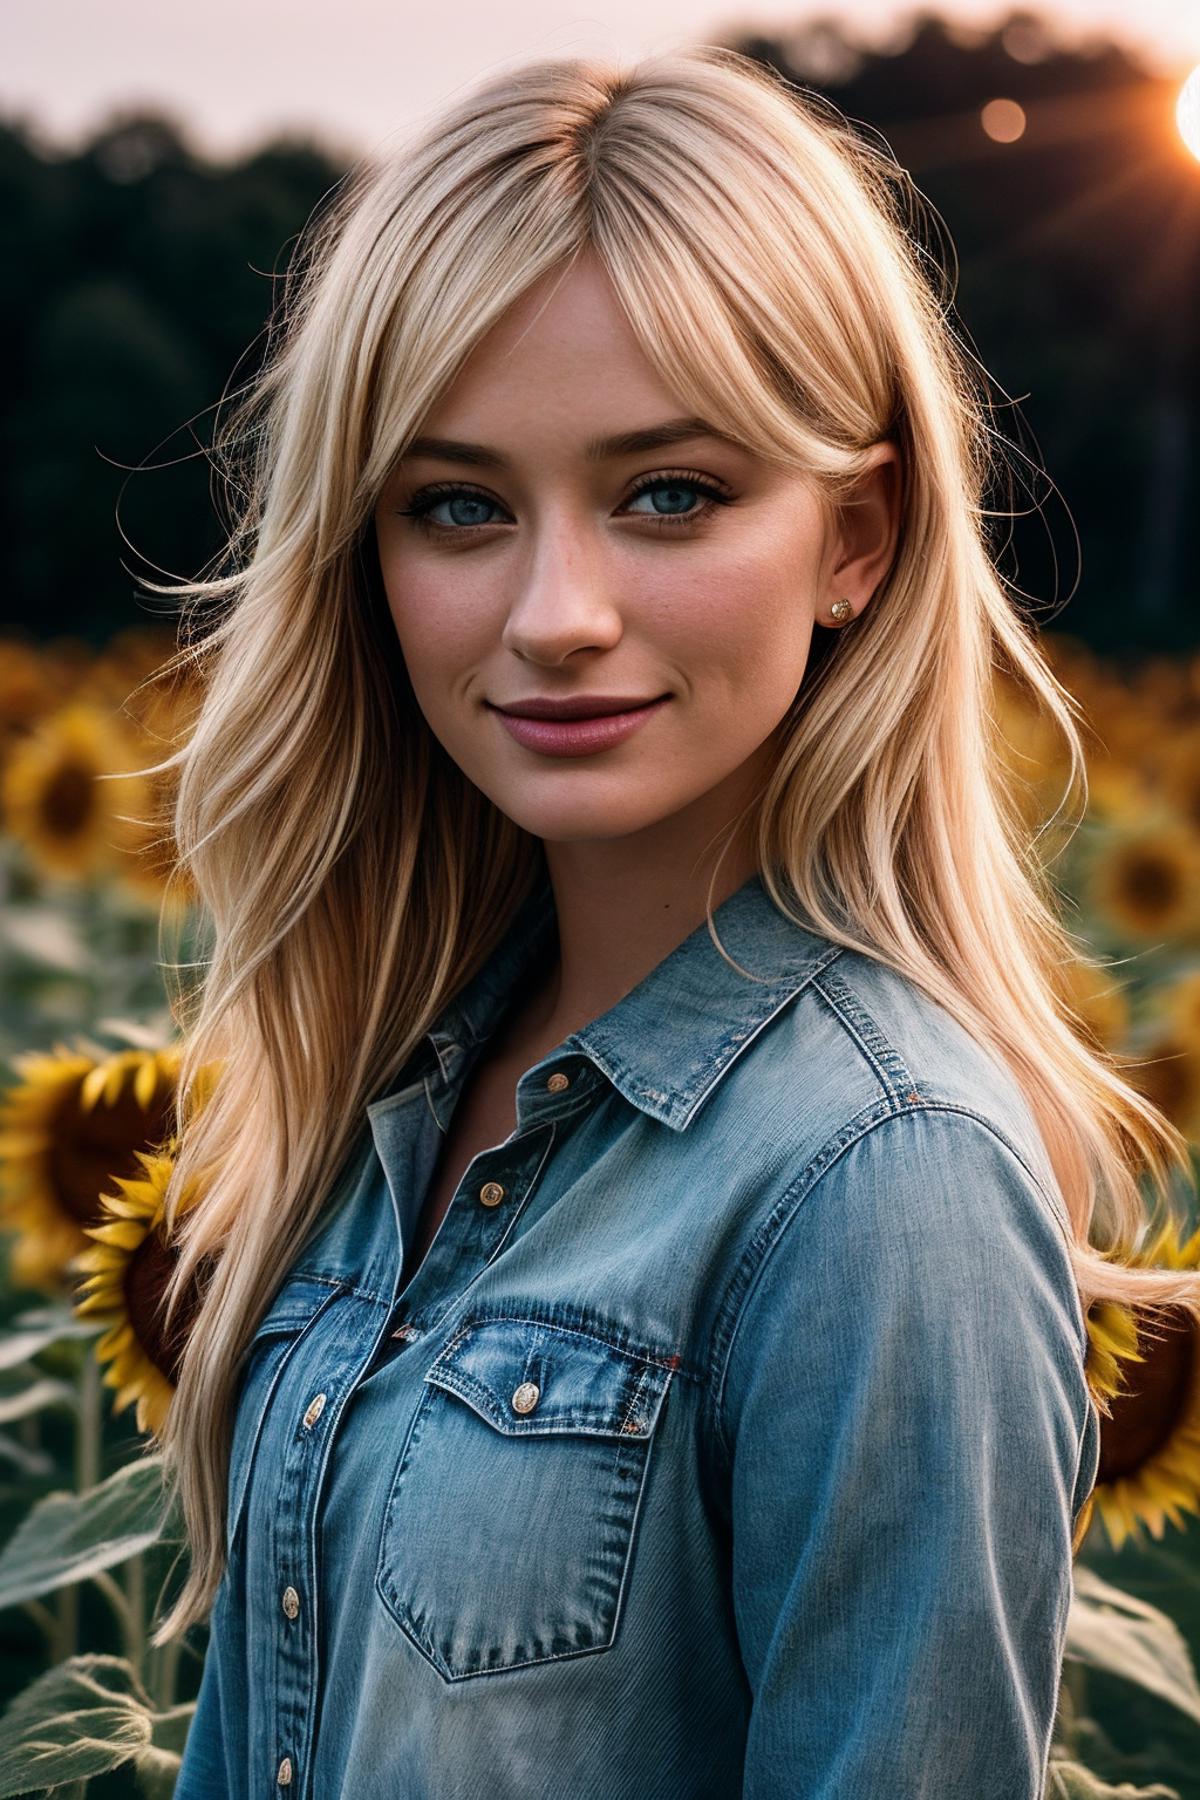 Blonde Woman with Blue Eyes Smiling in a Field of Sunflowers